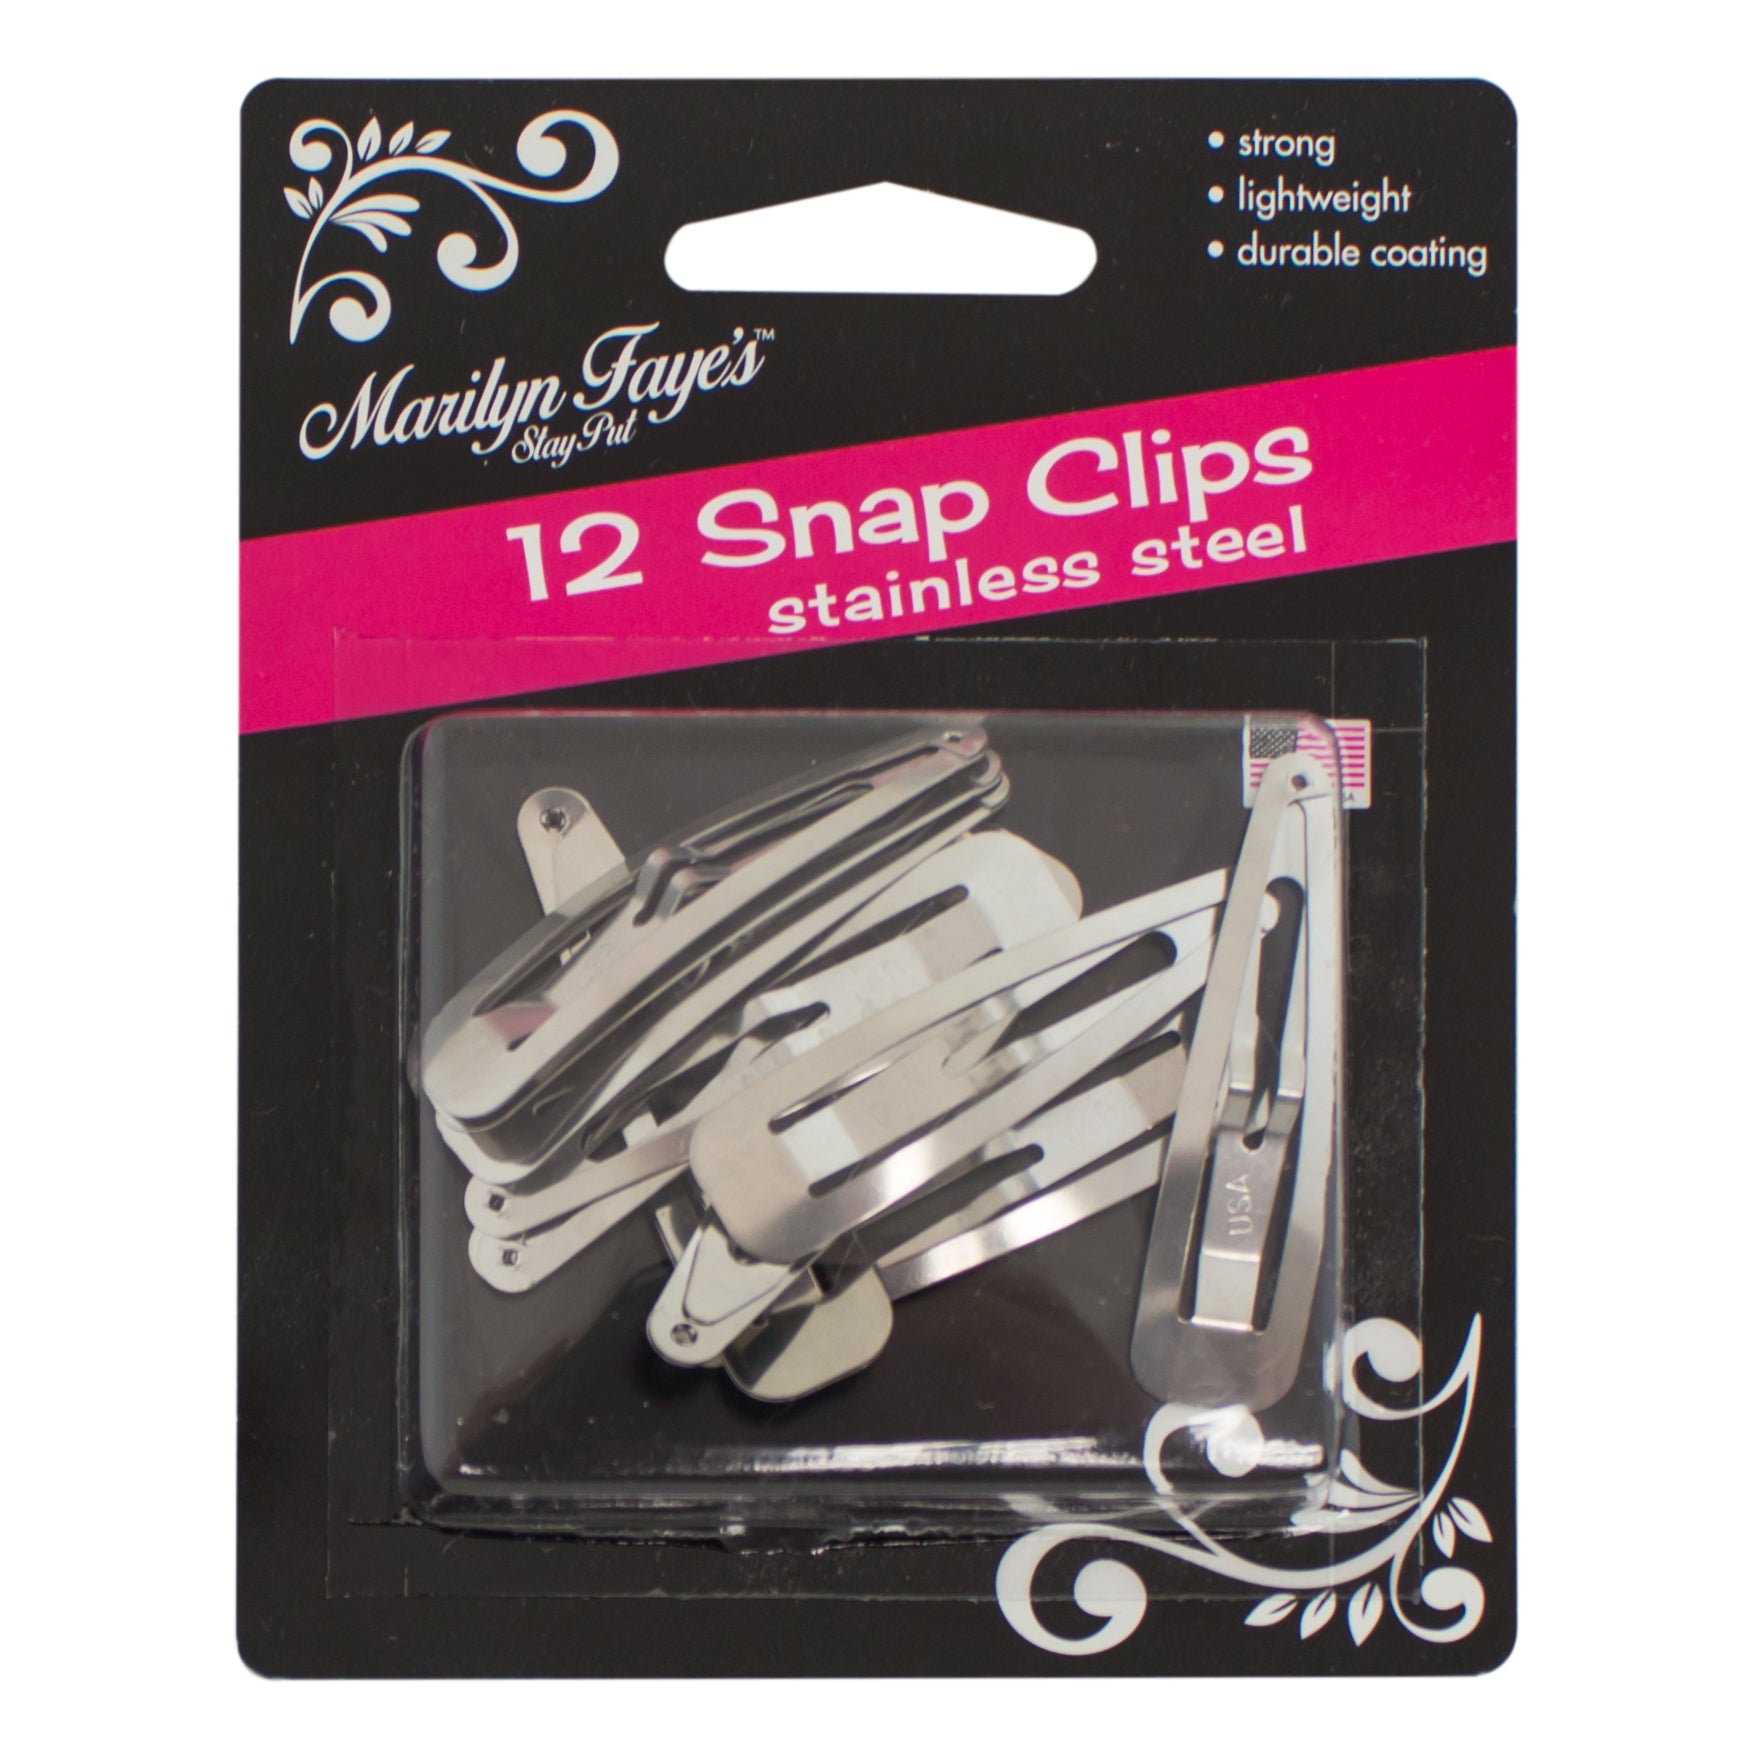 Marilyn Faye's Snap Hair Clips – Good's Store Online